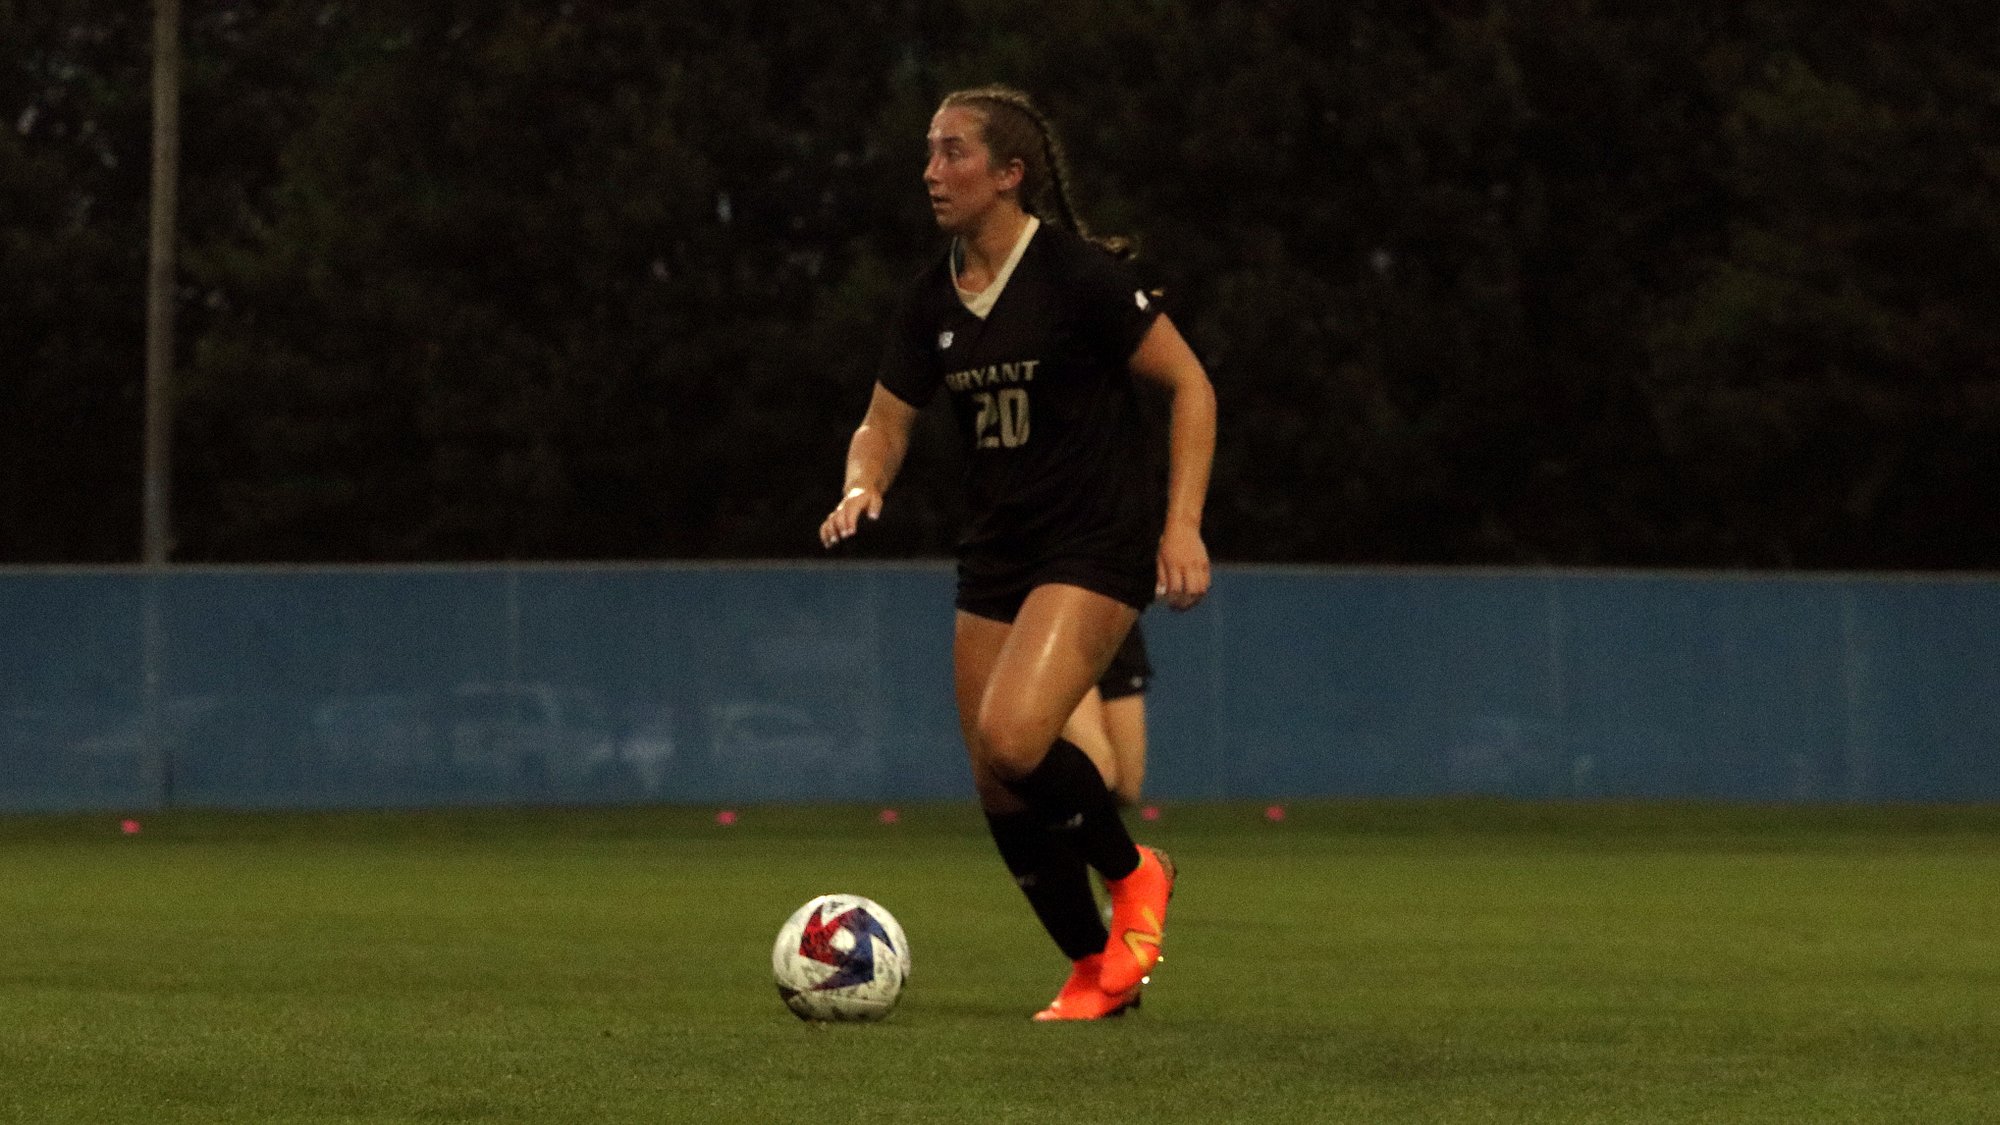 Bryant loses last game of road trip 2-1 against Holy Cross